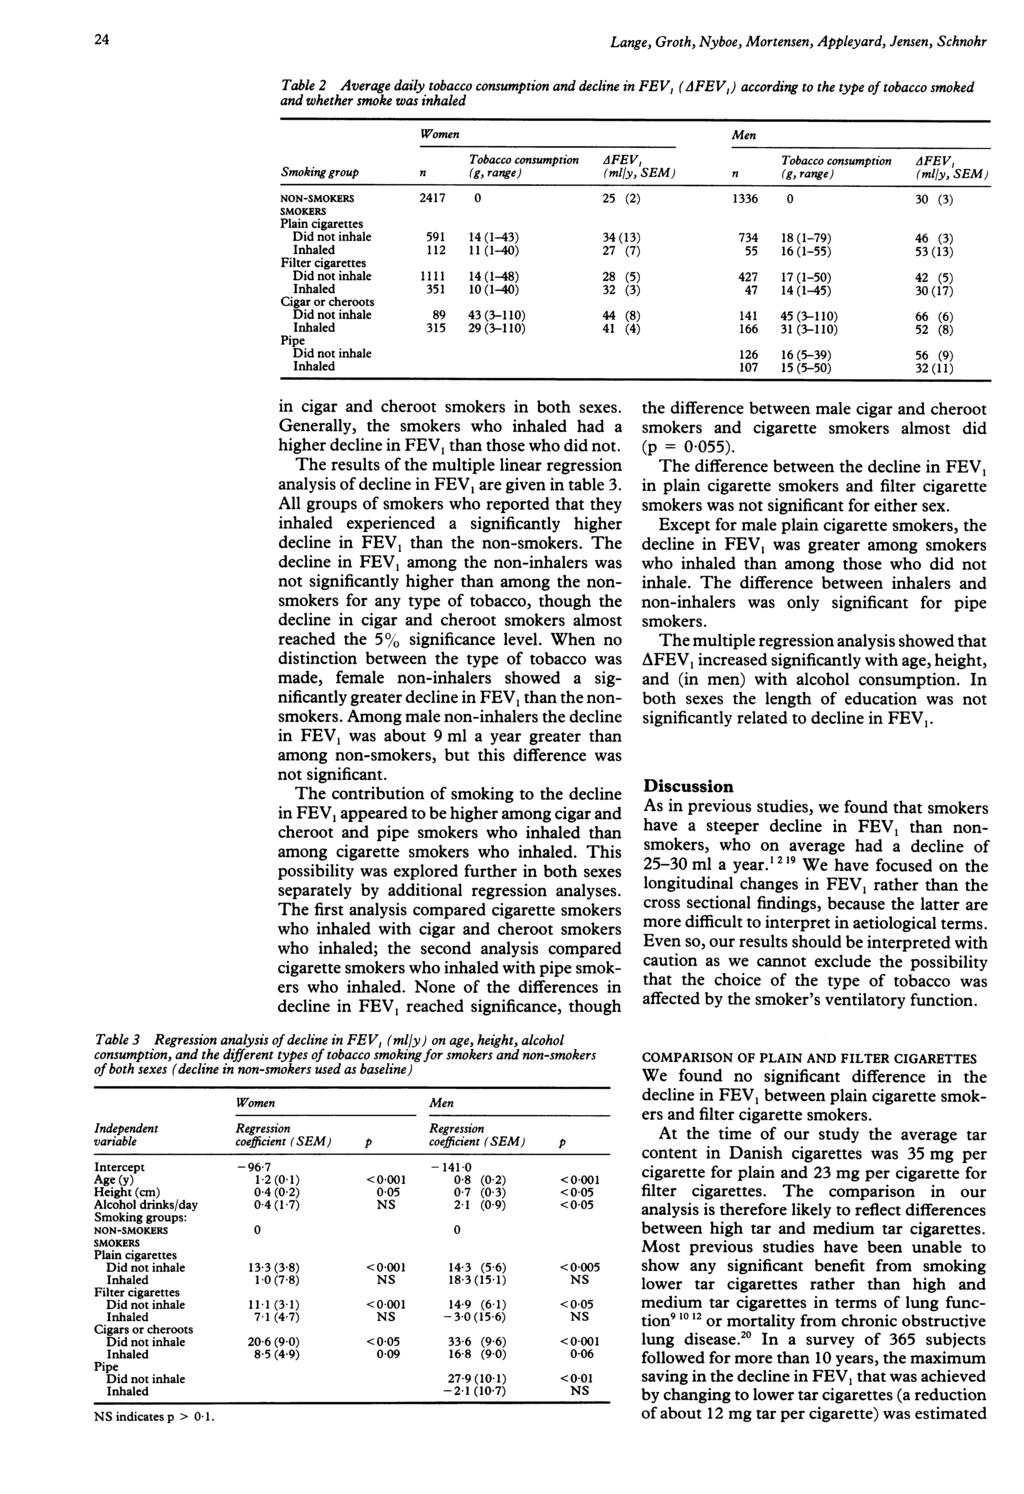 24 Lange, Groth, Nyboe, Mortensen, Appleyard, Jensen, Schnohr Table 2 Average daily tobacco consumption and decline in FEV, (LFEV,) according to the type of tobacco smoked and whether smoke was